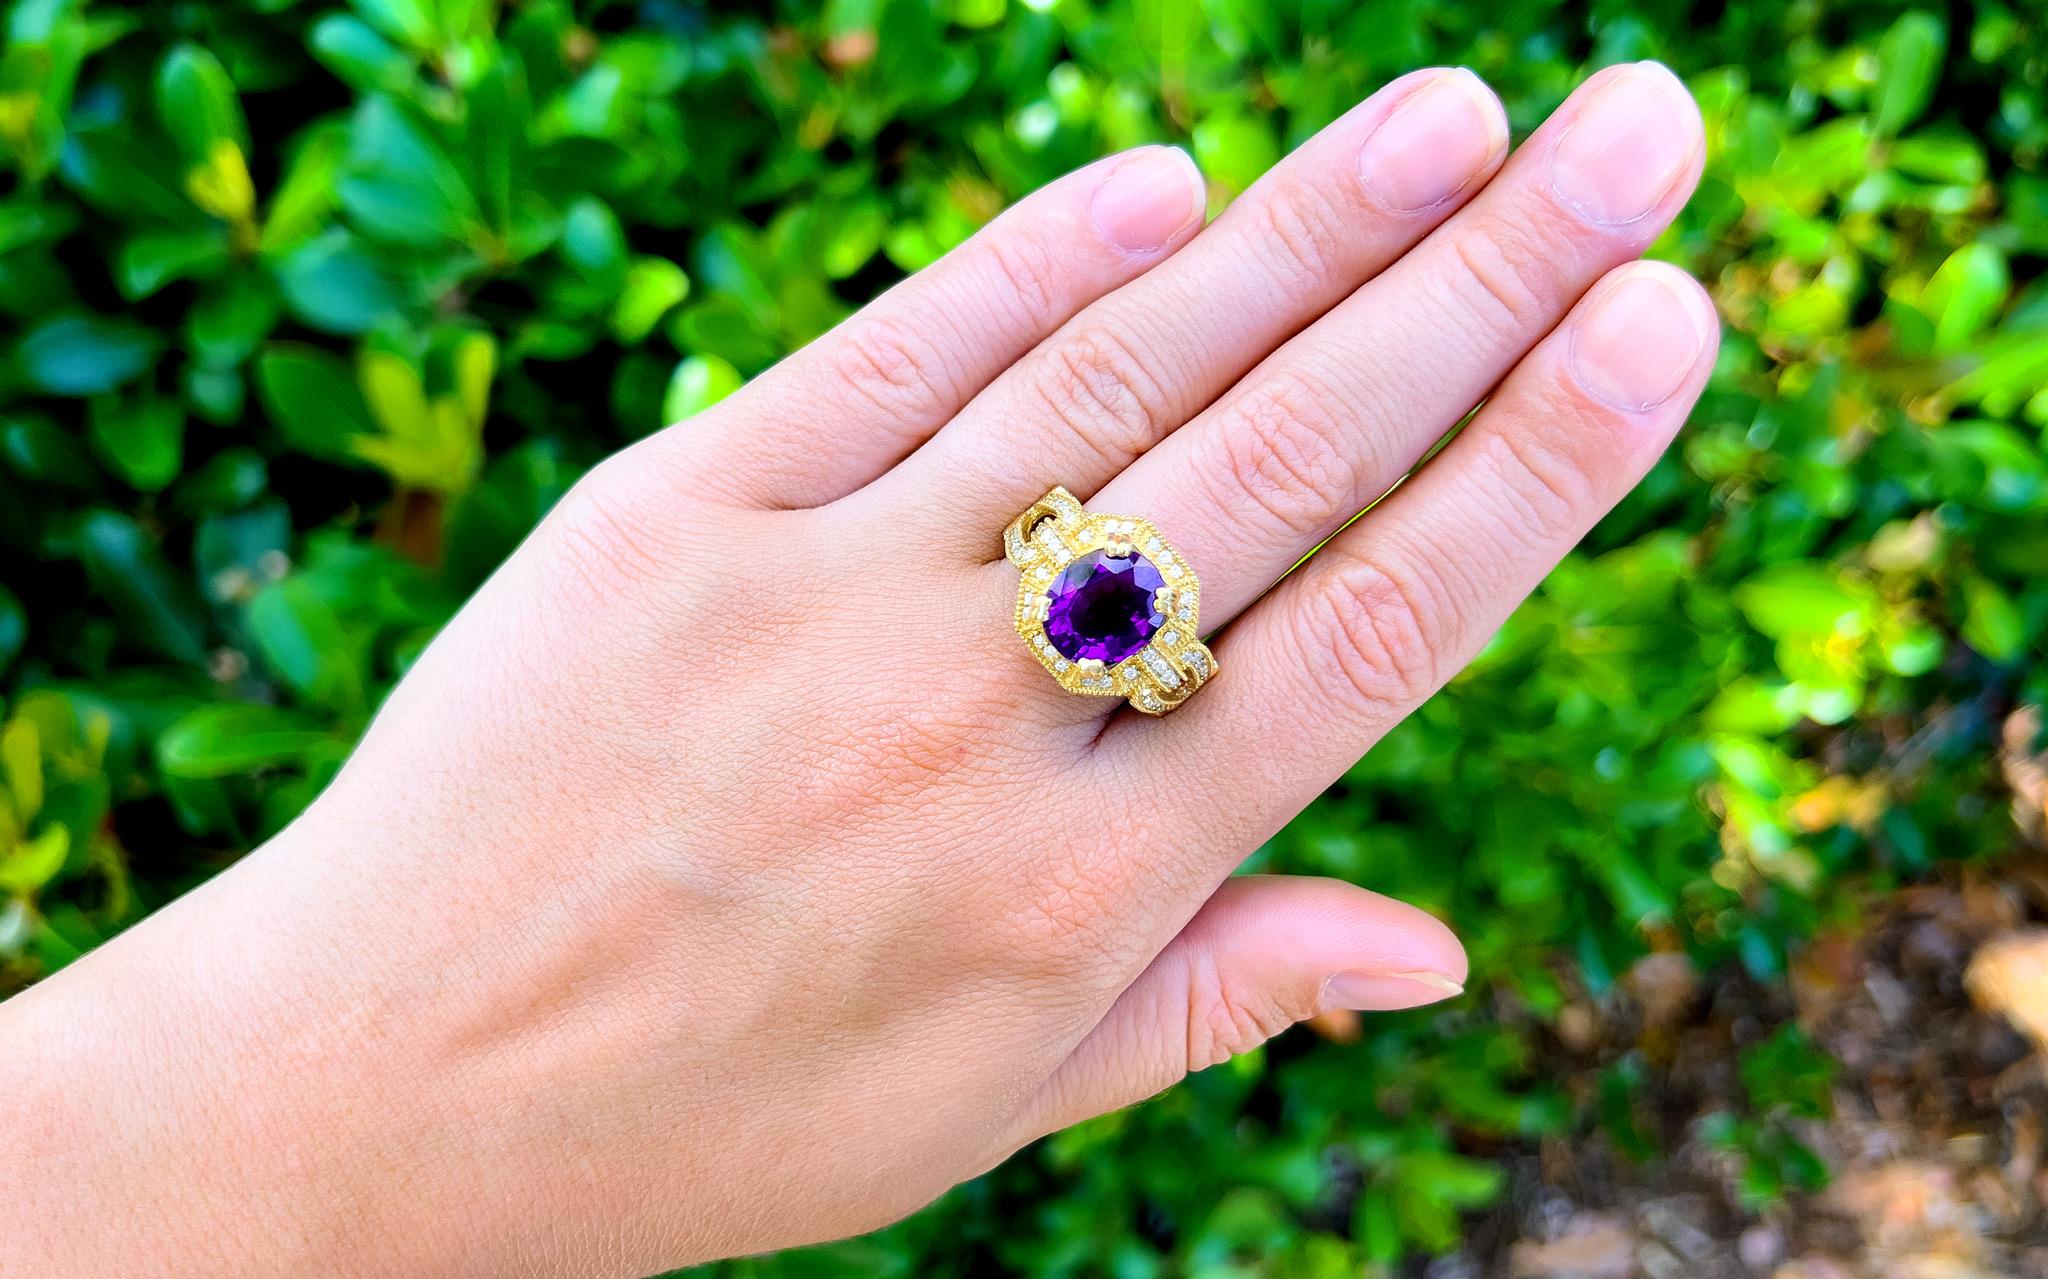 Amethyst = 6 Carat
Cut: Oval
Diamonds = 1.50 Carats
( Color: F, Clarity: VS )
Metal: 14K Gold
Ring Size: 8* US
*It can be resized complimentary